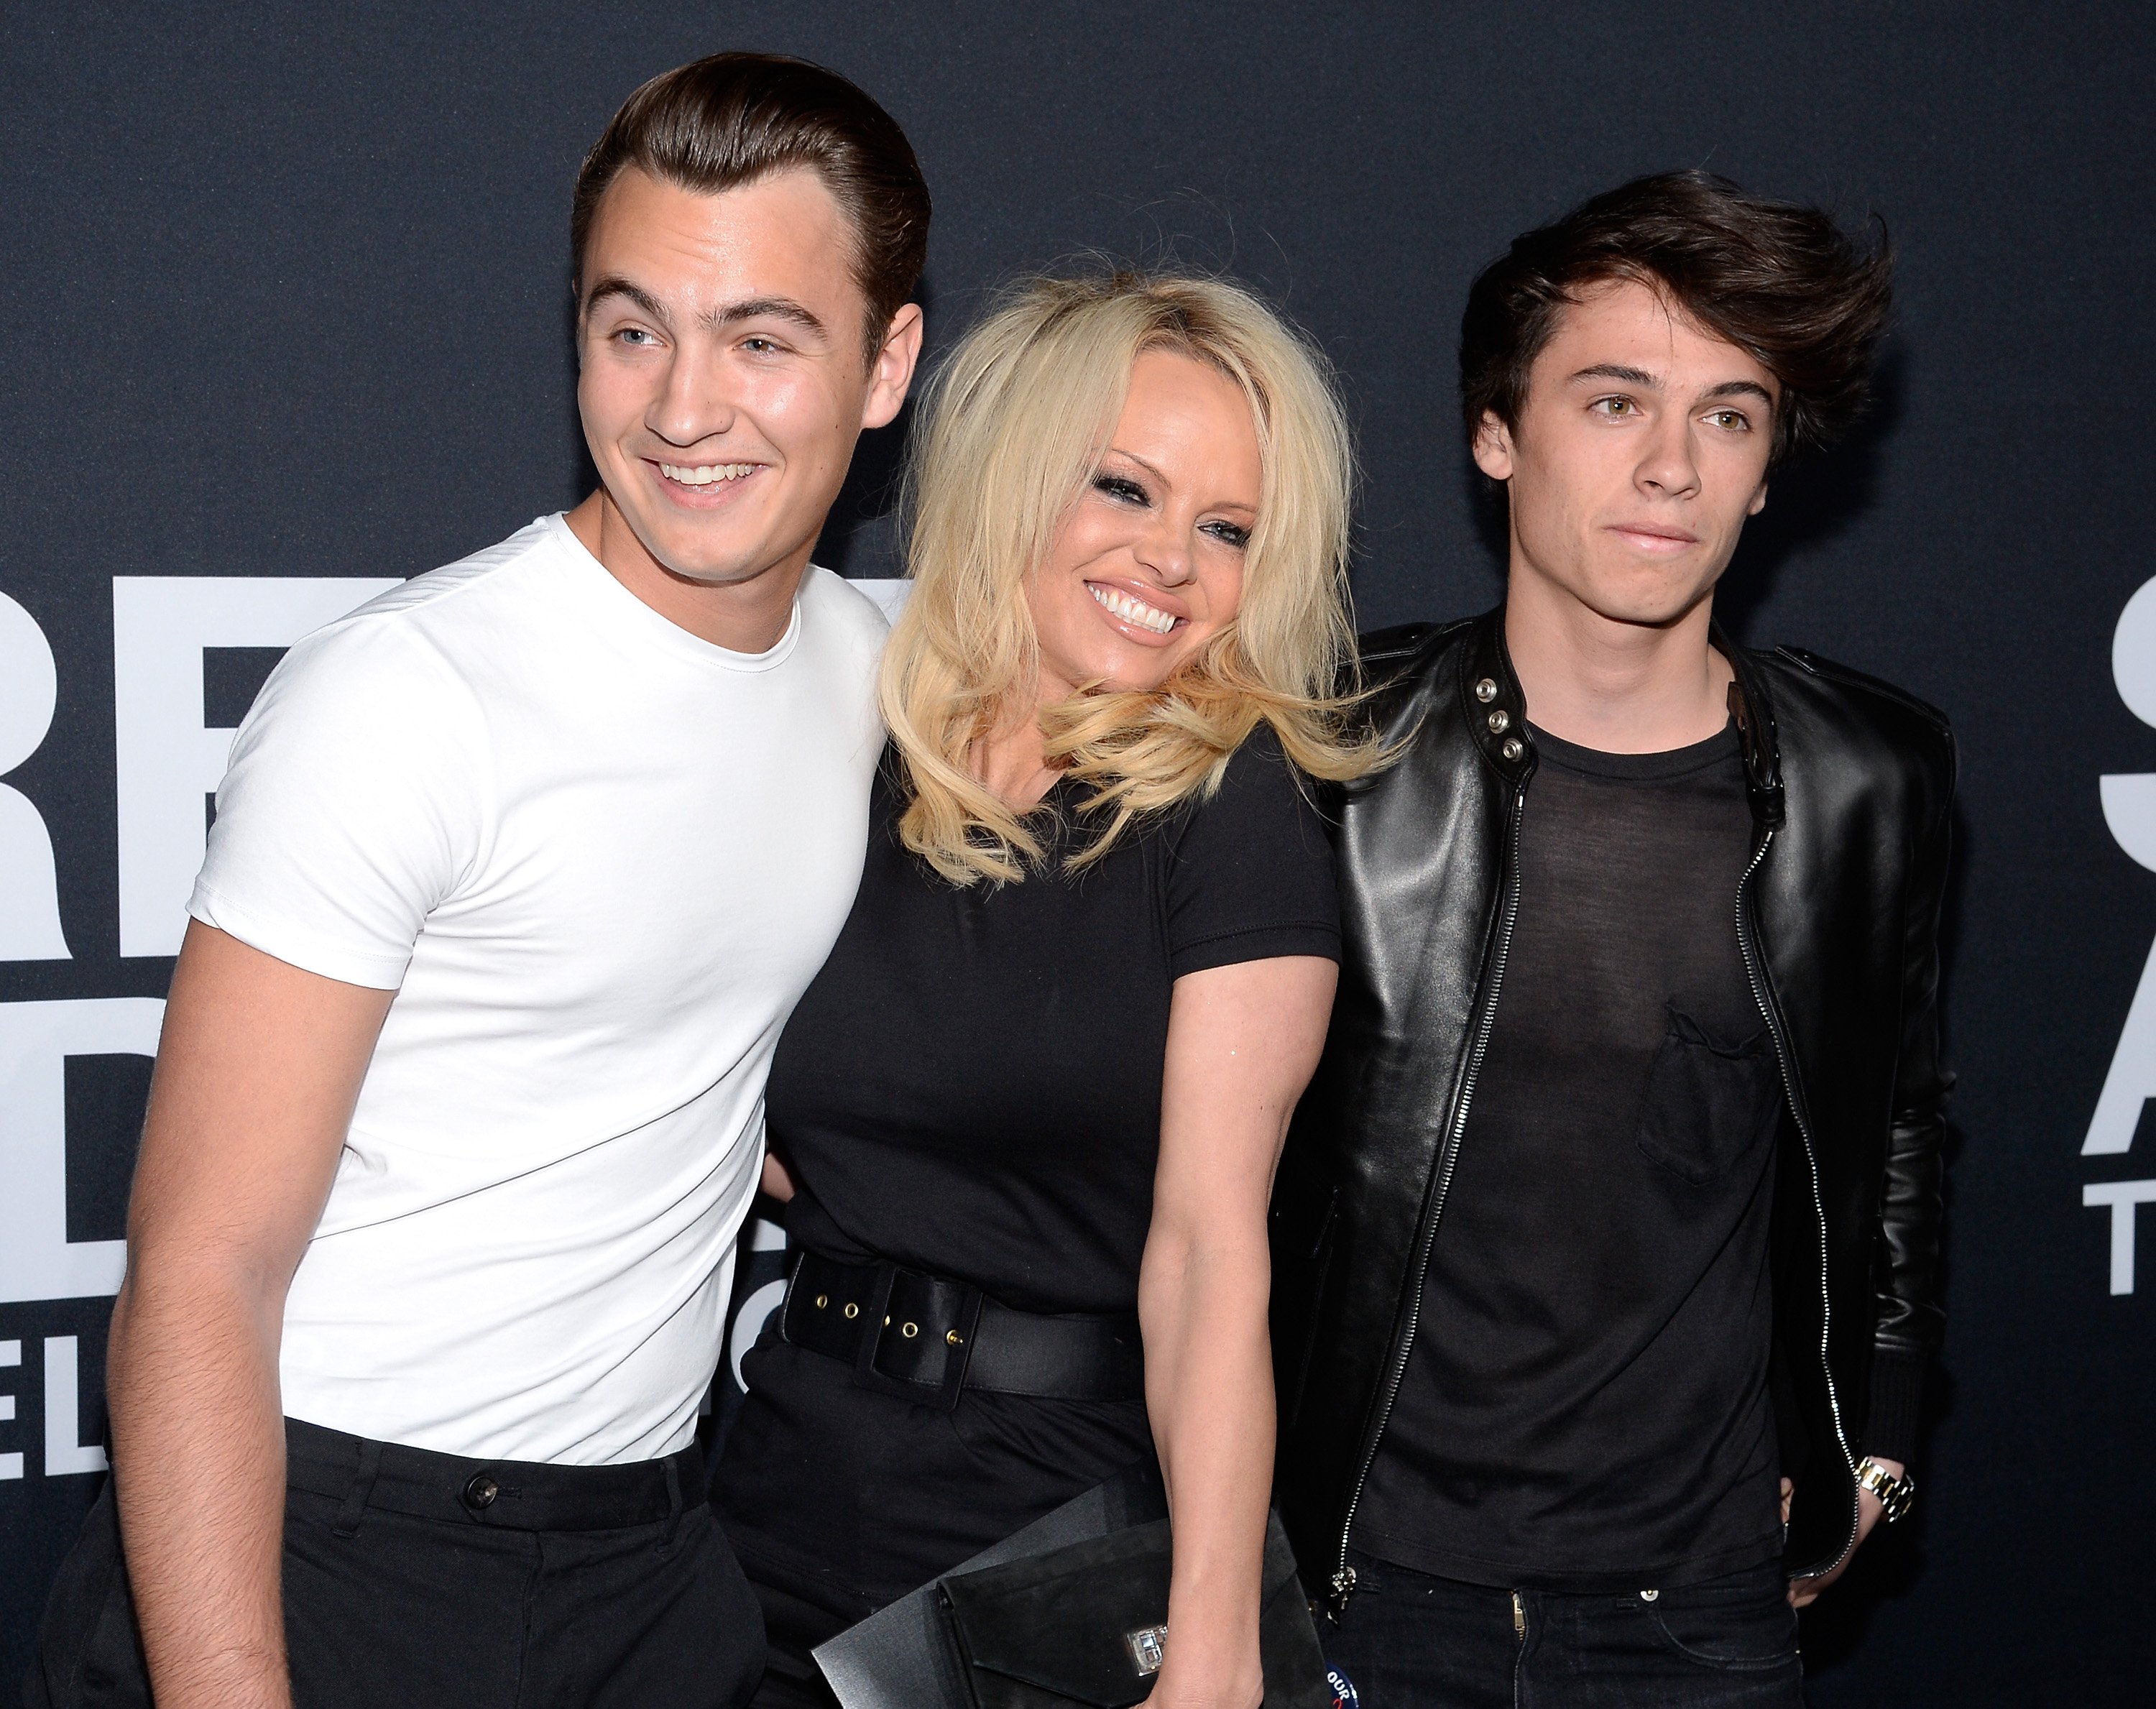 Pamela Anderson, Brandon Lee, and Dylan Lee | Photo: Getty Images